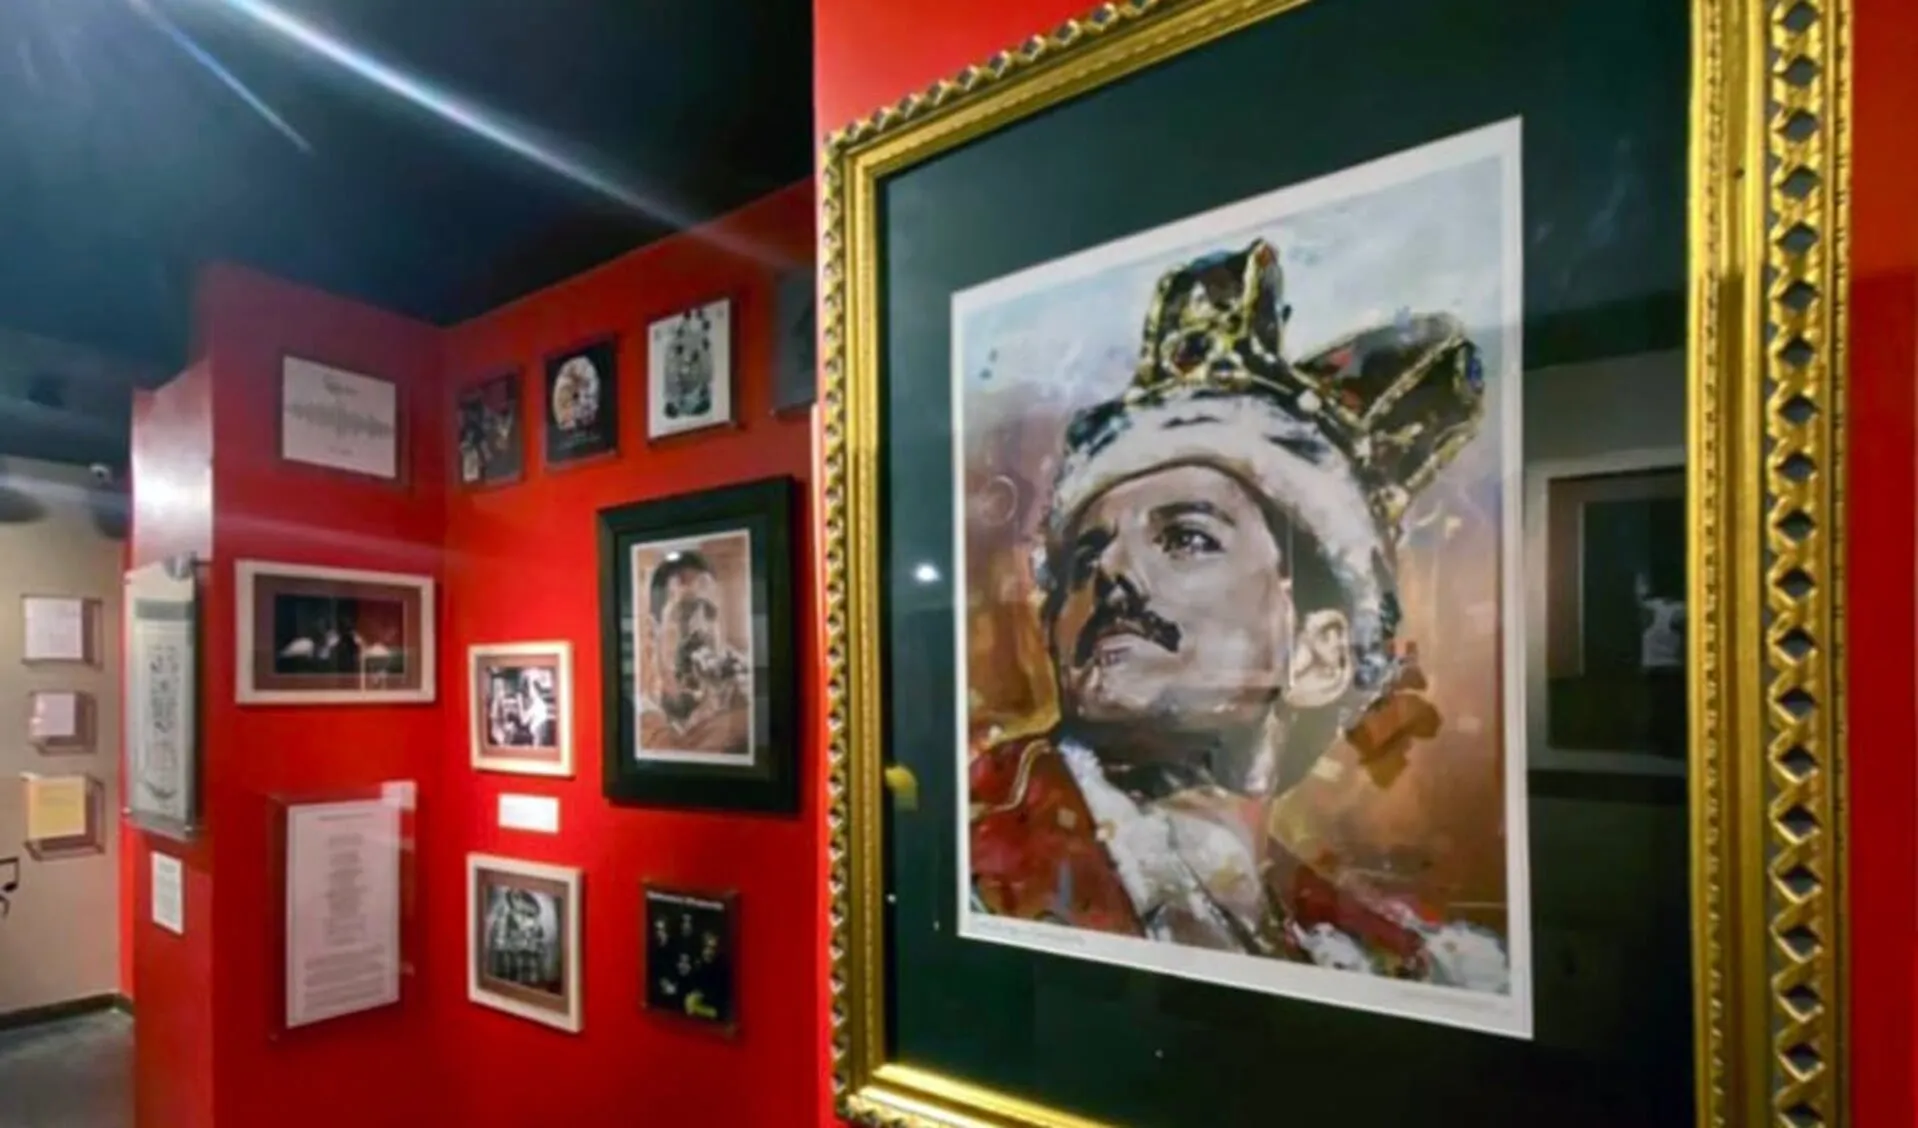 Freddie Mercury Museum in Tanzania, Africa | Museums - Rated 3.2